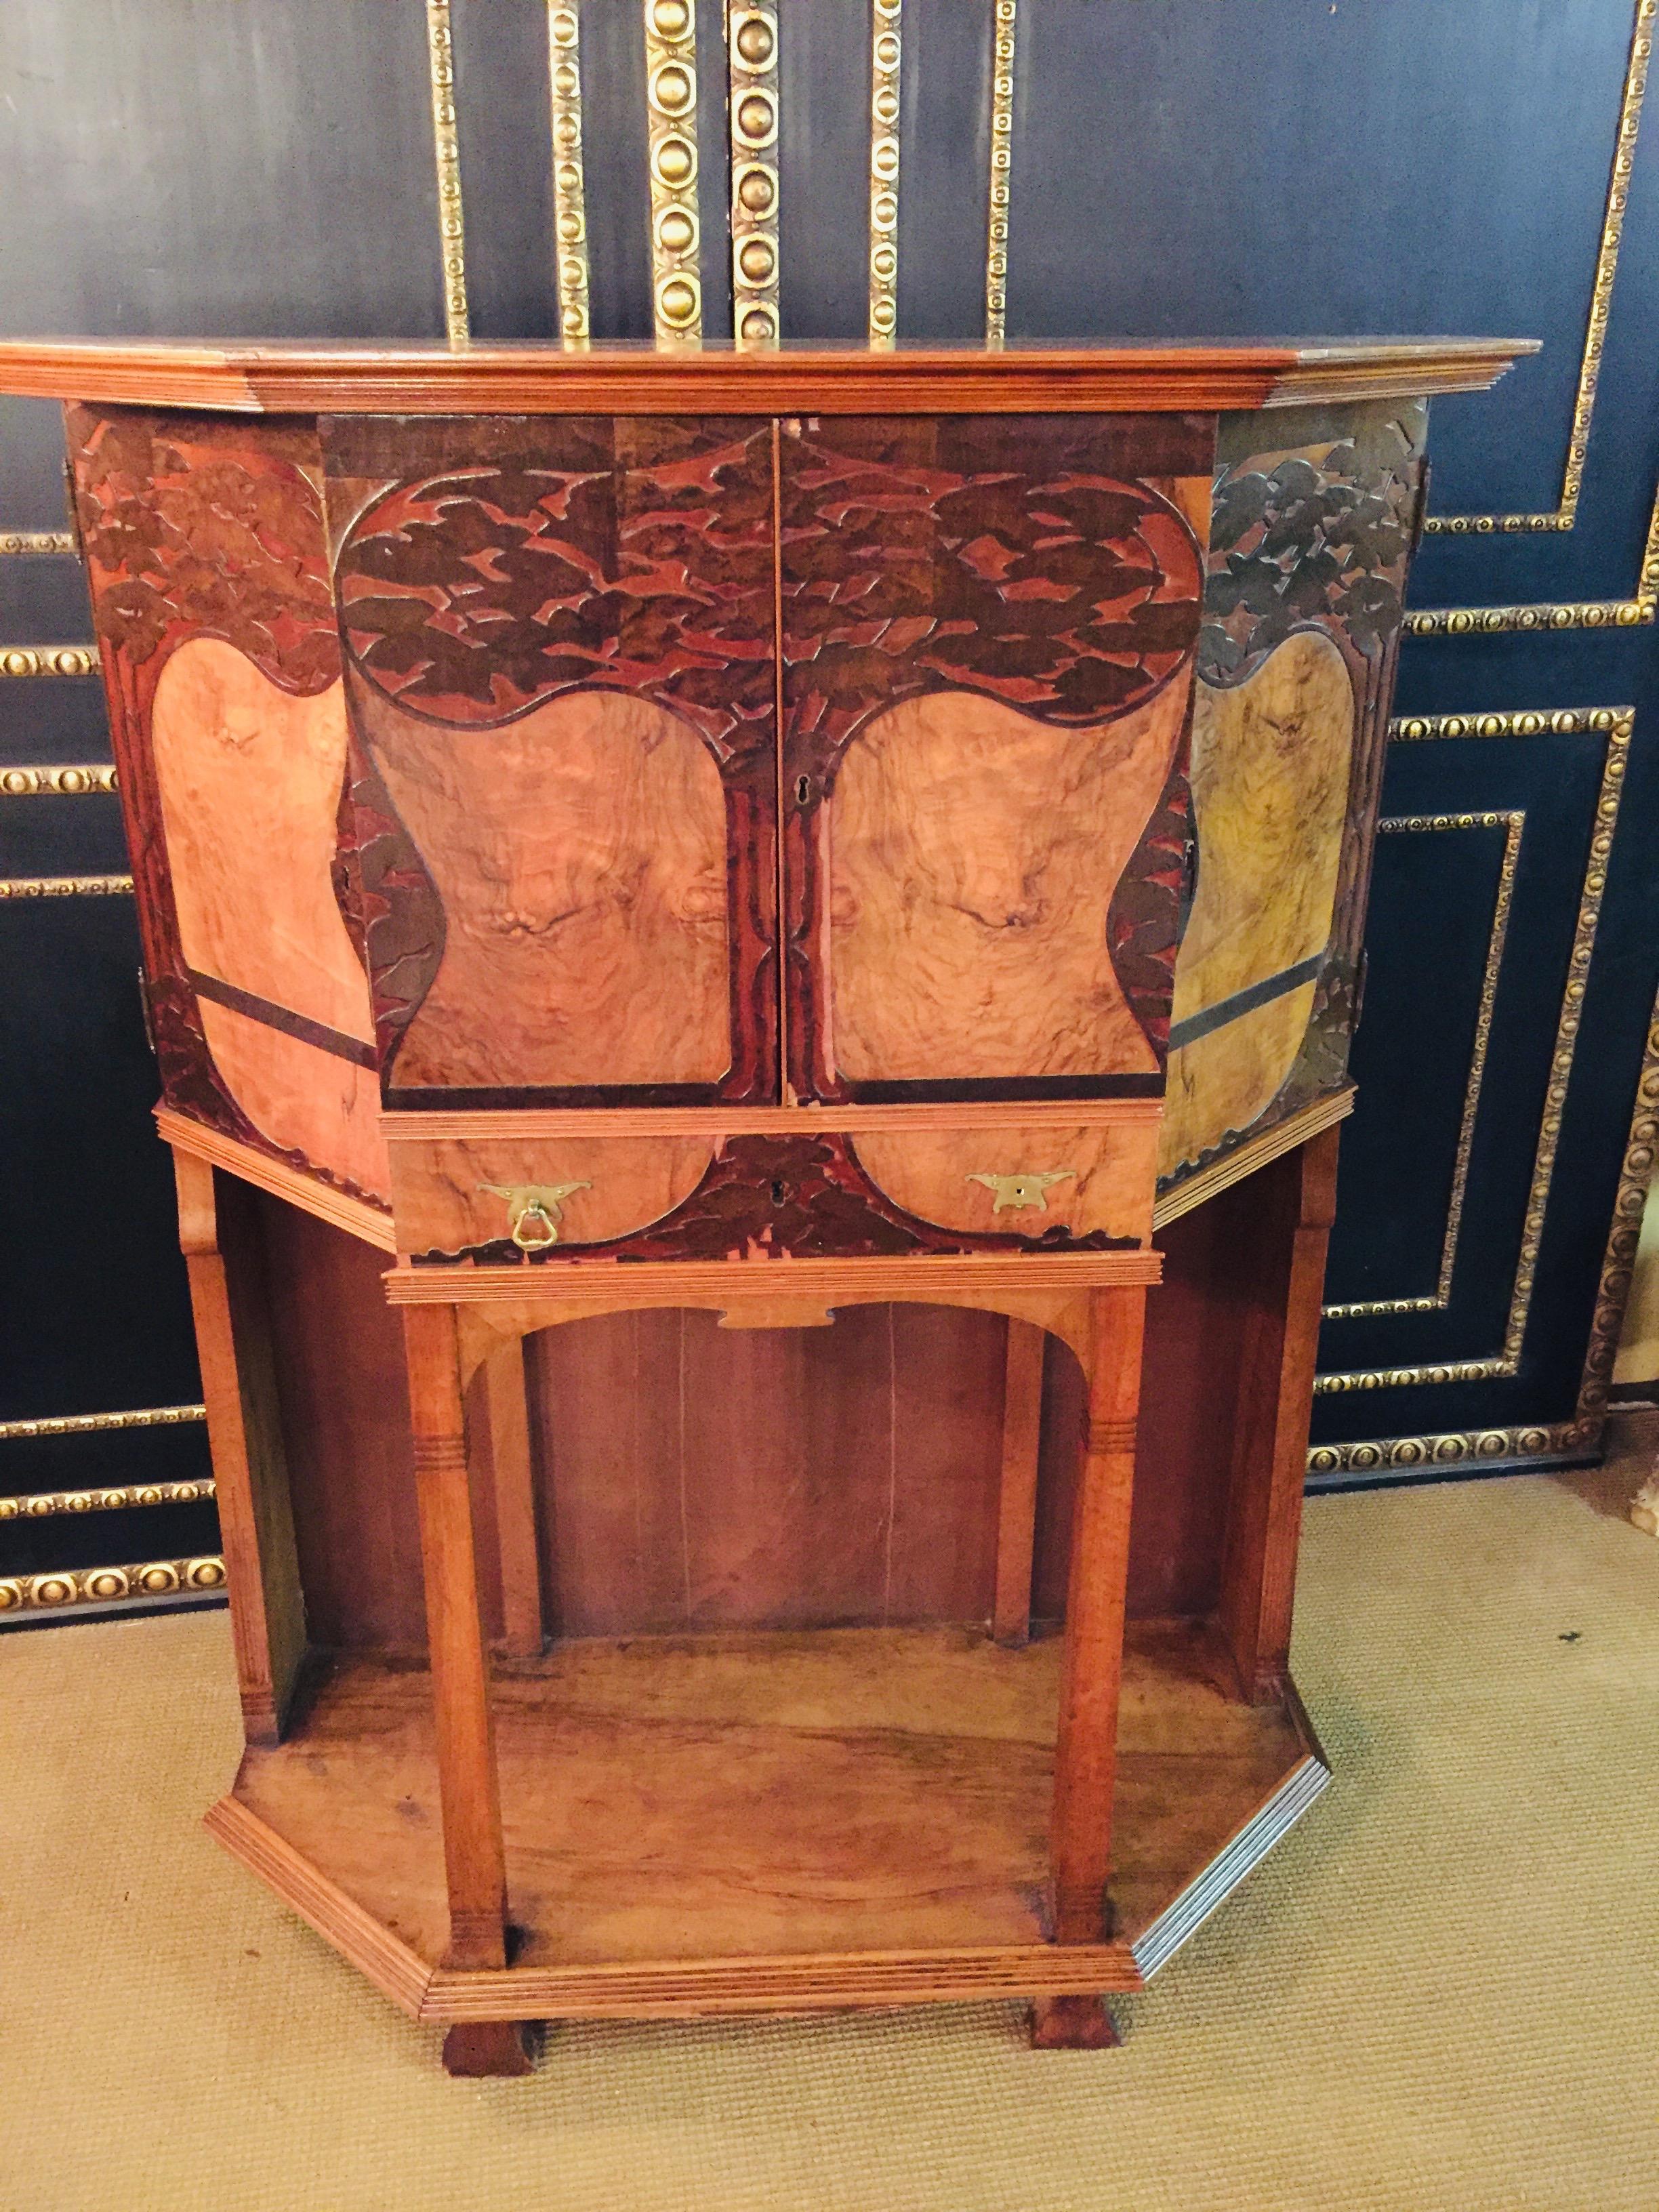 A French Art Nouveau walnut credenza in ash and rosewood, featuring depicted in marquetry and deep carving. The credenza has four lockable storage areas, each with a shelf and two drawers,
circa 1900.